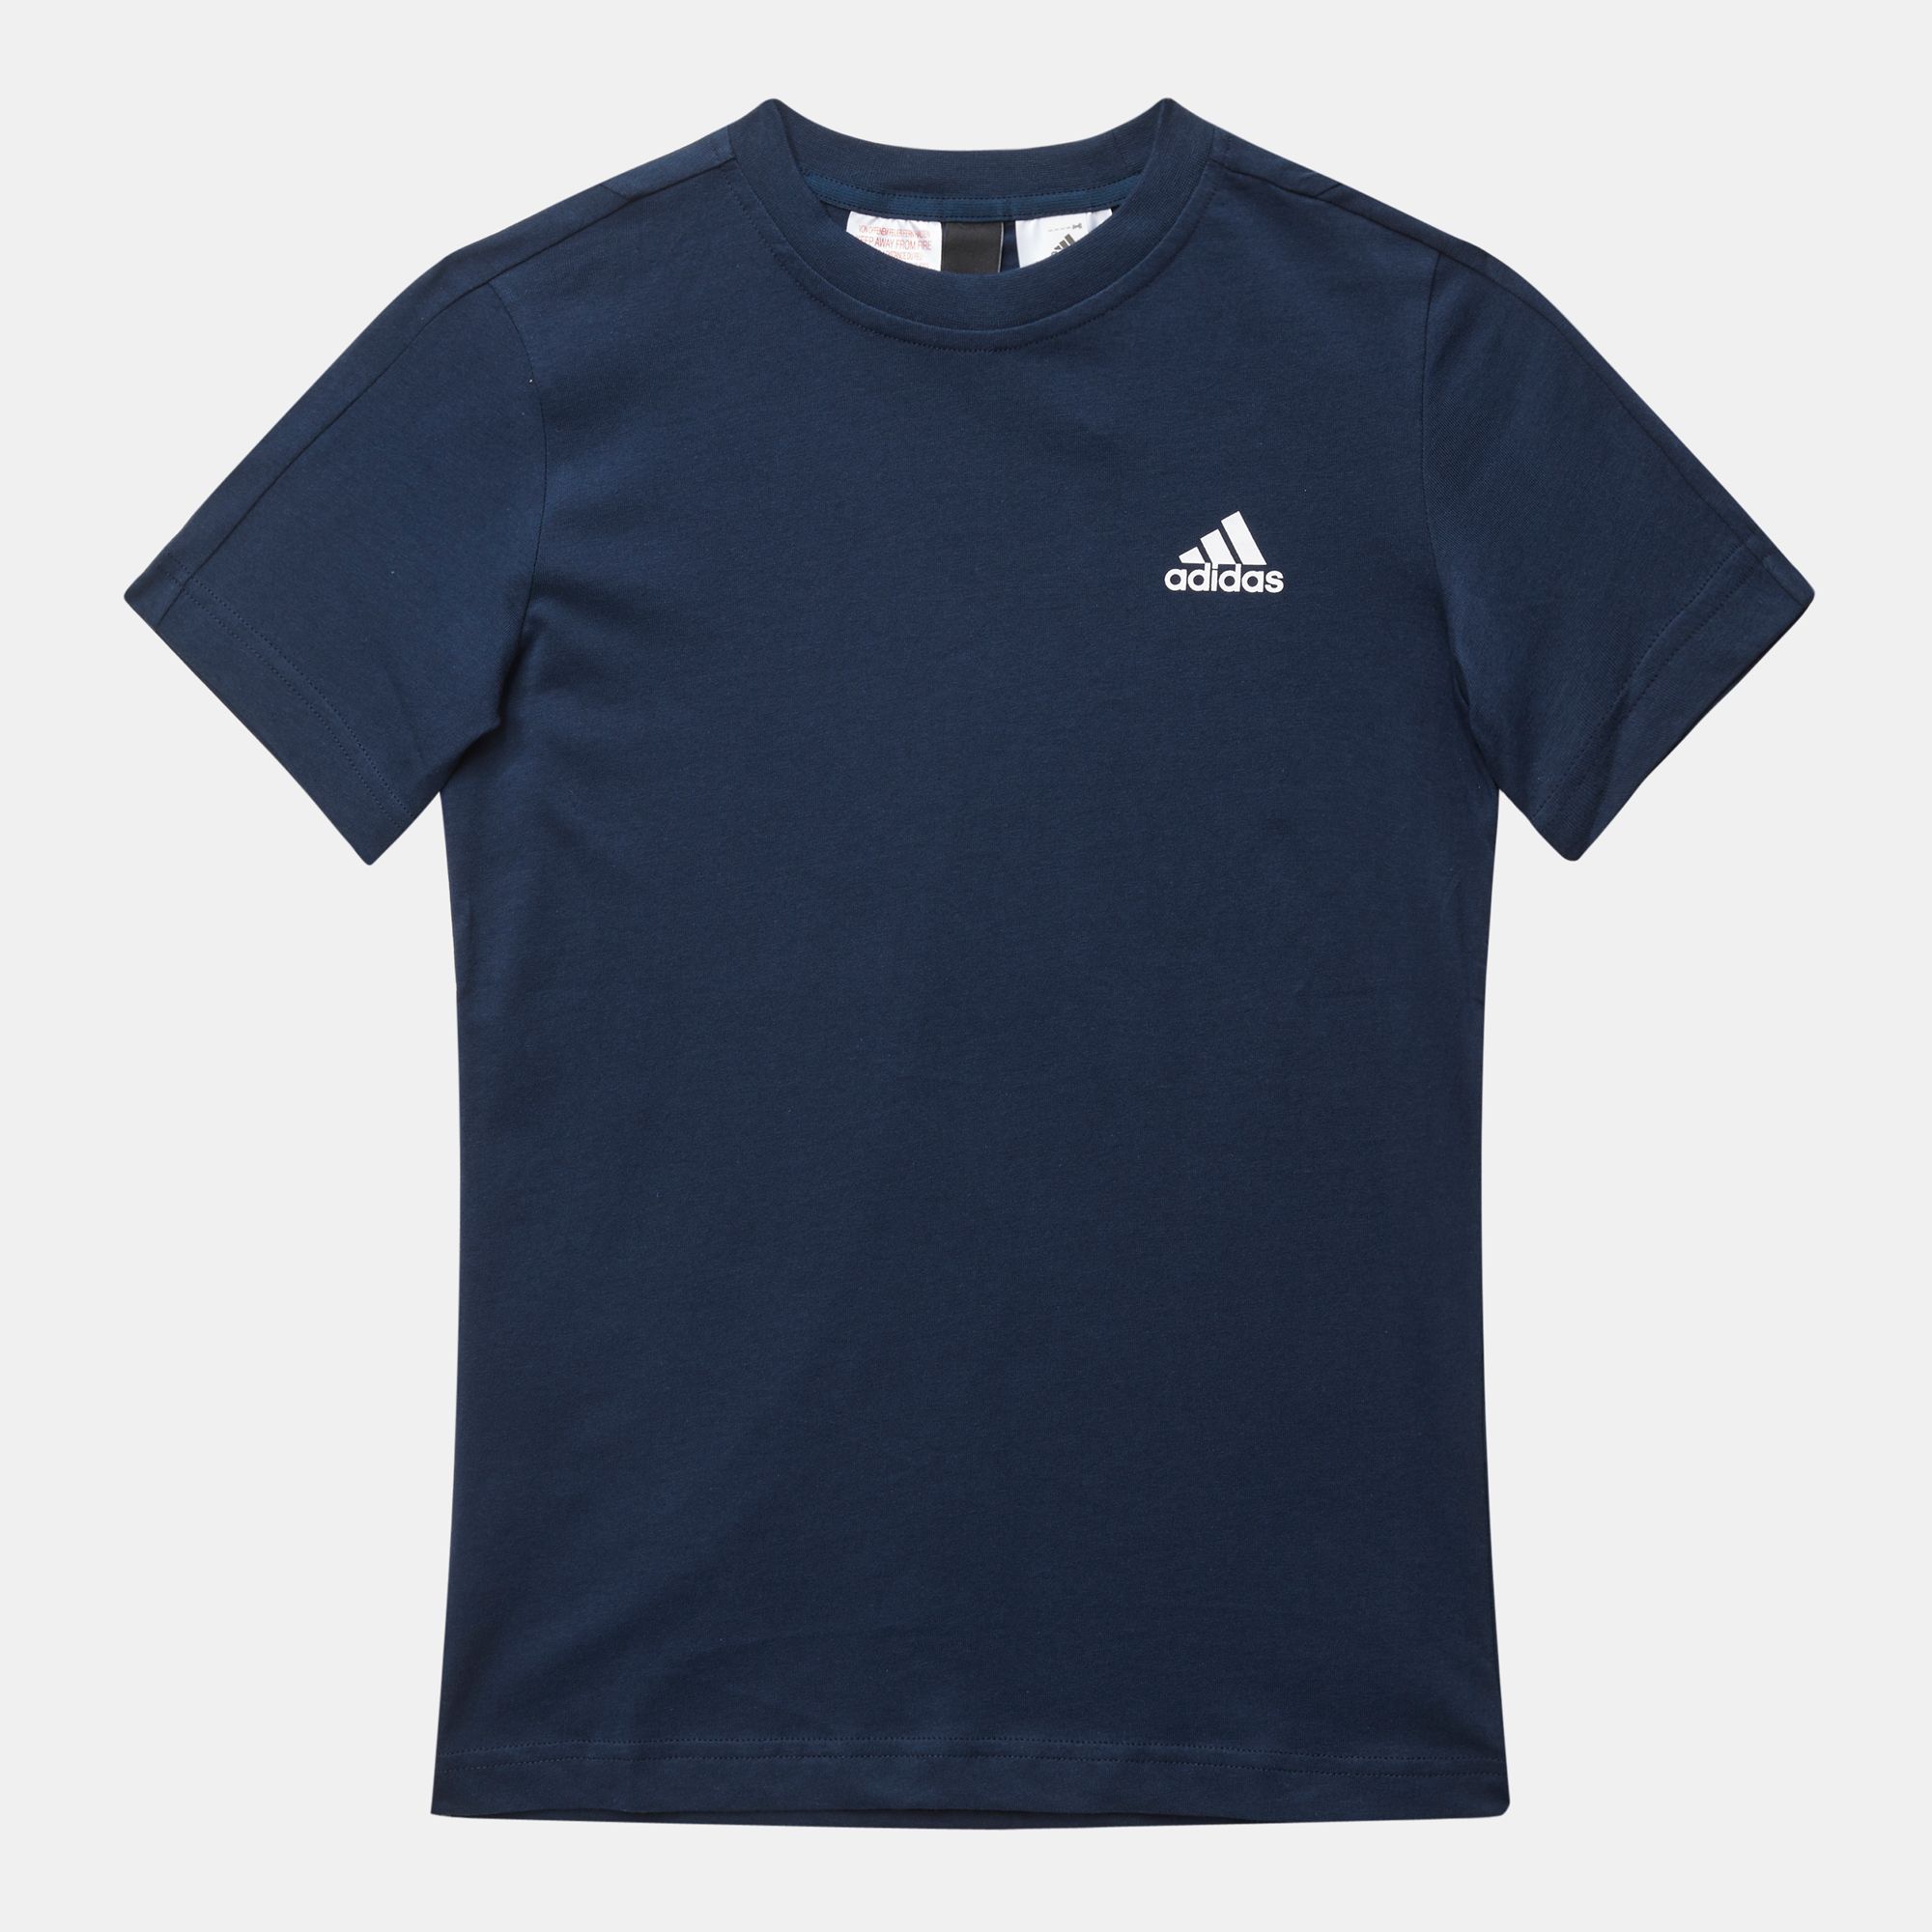 Shop Blue adidas Kids’ Base T-Shirt for Kids by adidas | SSS